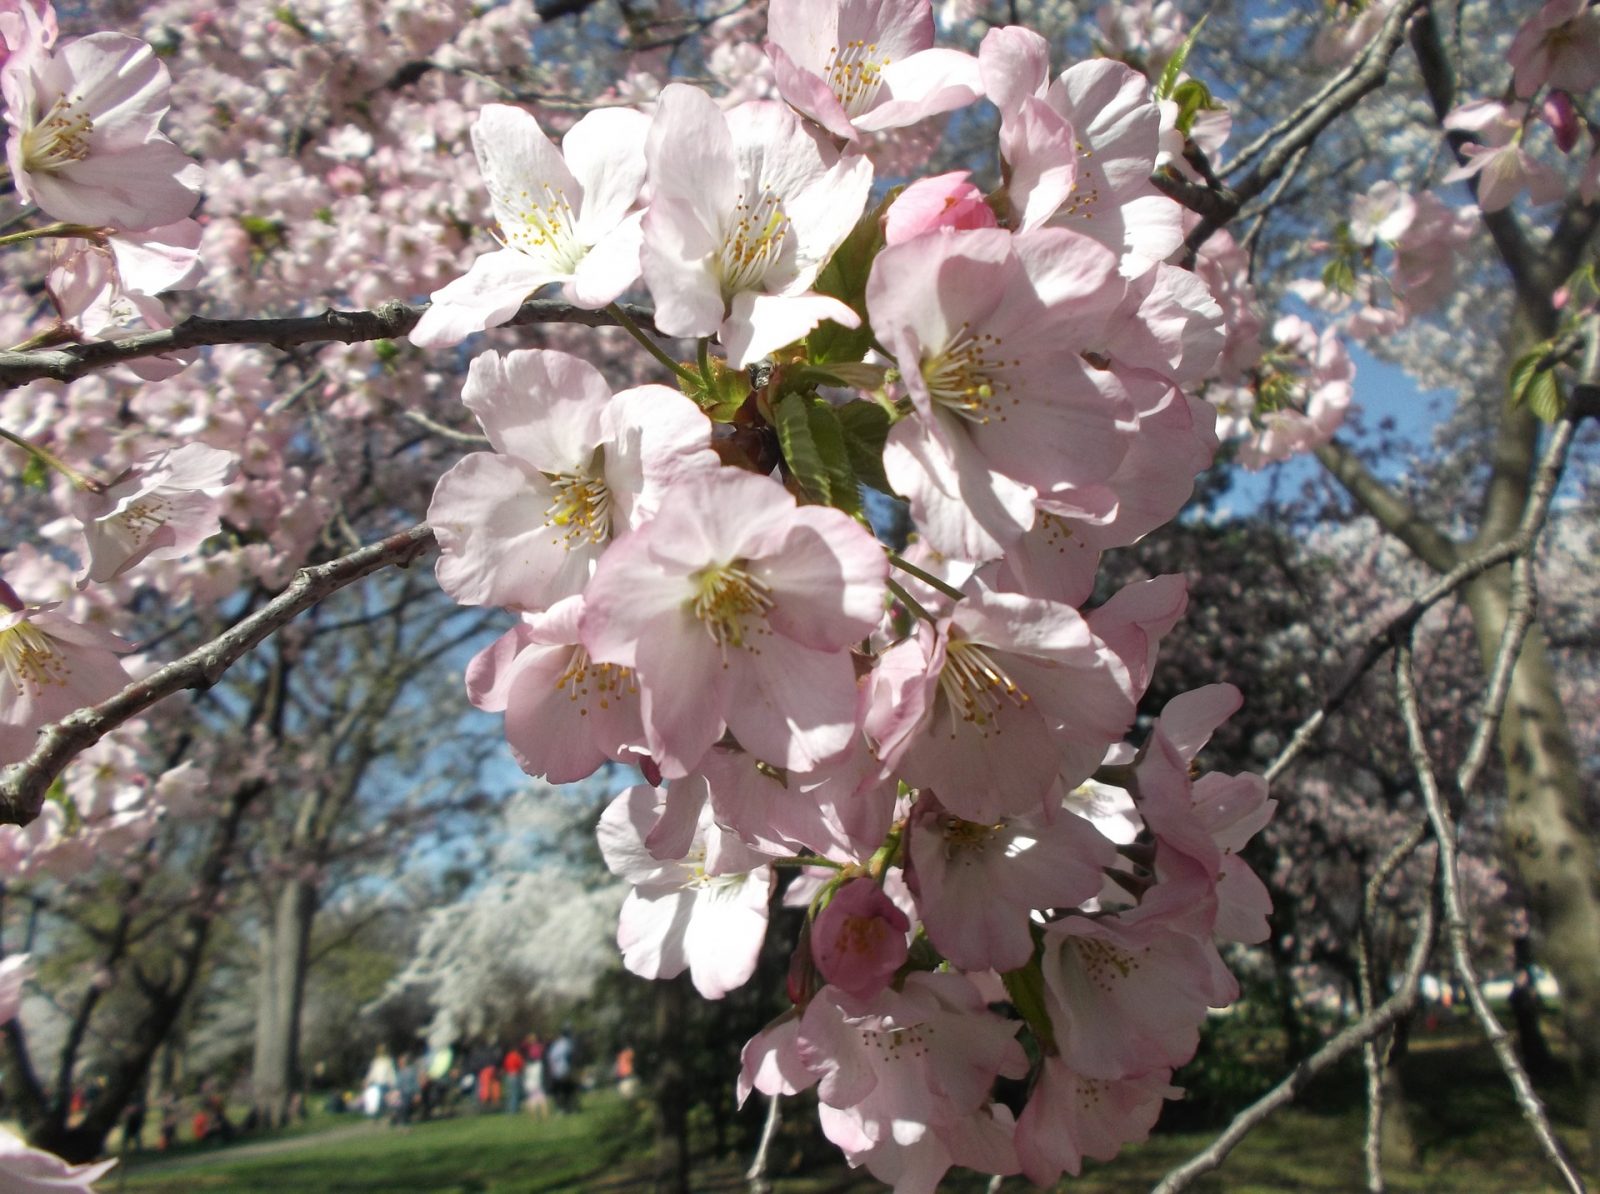 Visit the Spectacular National Cherry Blossom Festival 2019 in Washington DC Cherry Blossom By Naturallee #CherryBlossomFestival #NationalCherryBlossom #CherryBlossom #SpringTime #SpringFlowers #WashingtonDC #Festival